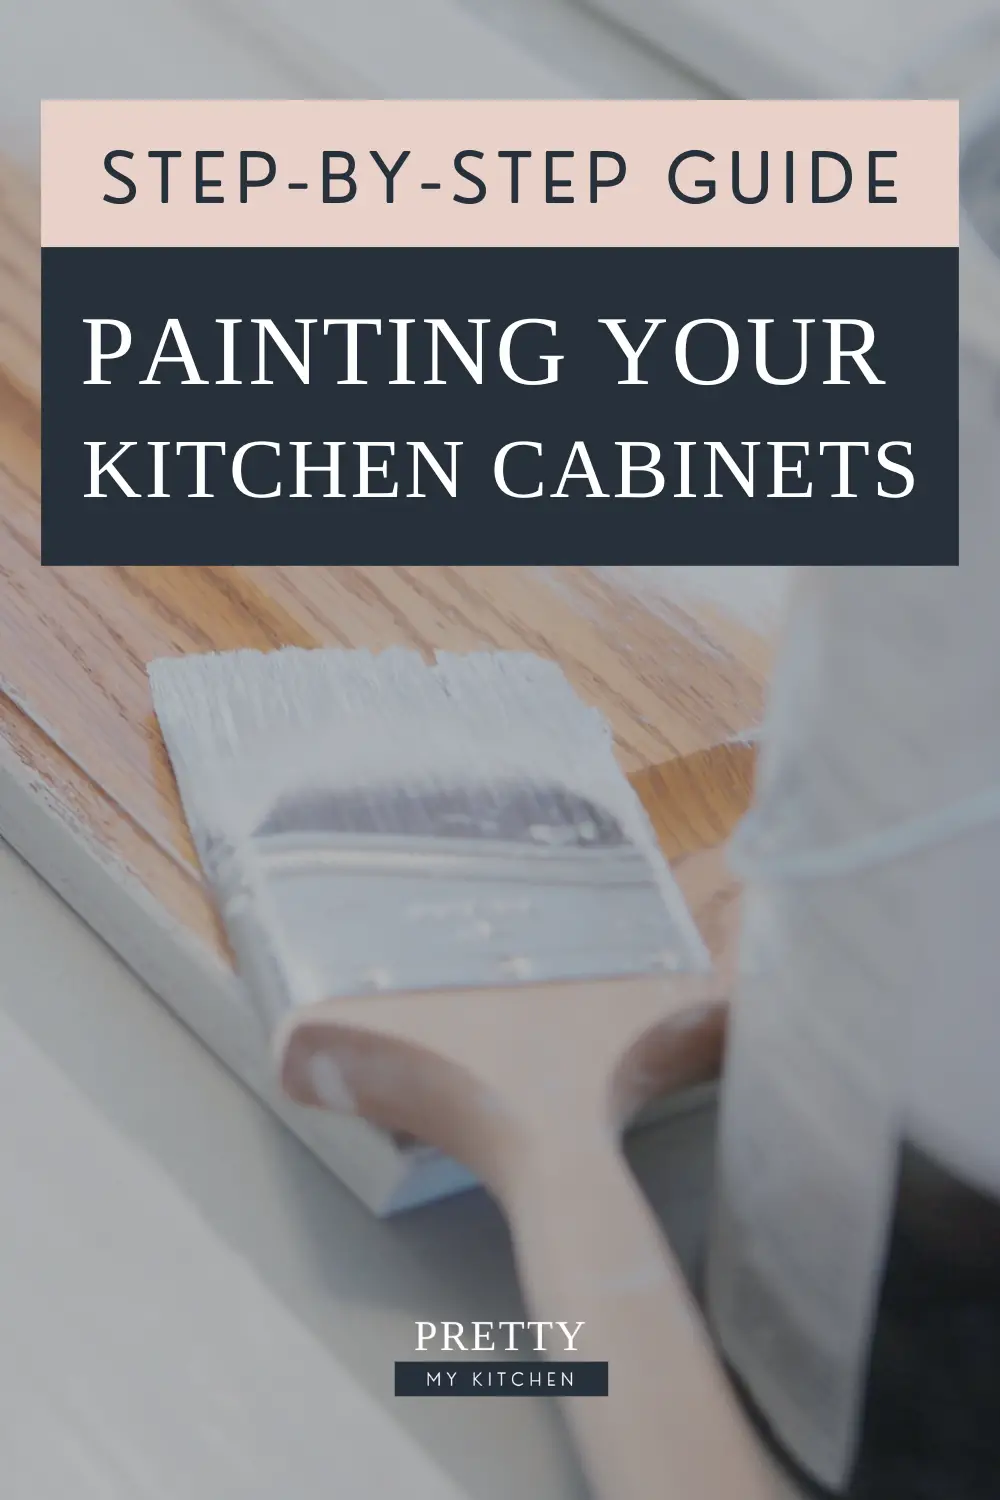 Step-by-Step Guide to Painting Your Kitchen Cabinets - Pretty My Kitchen